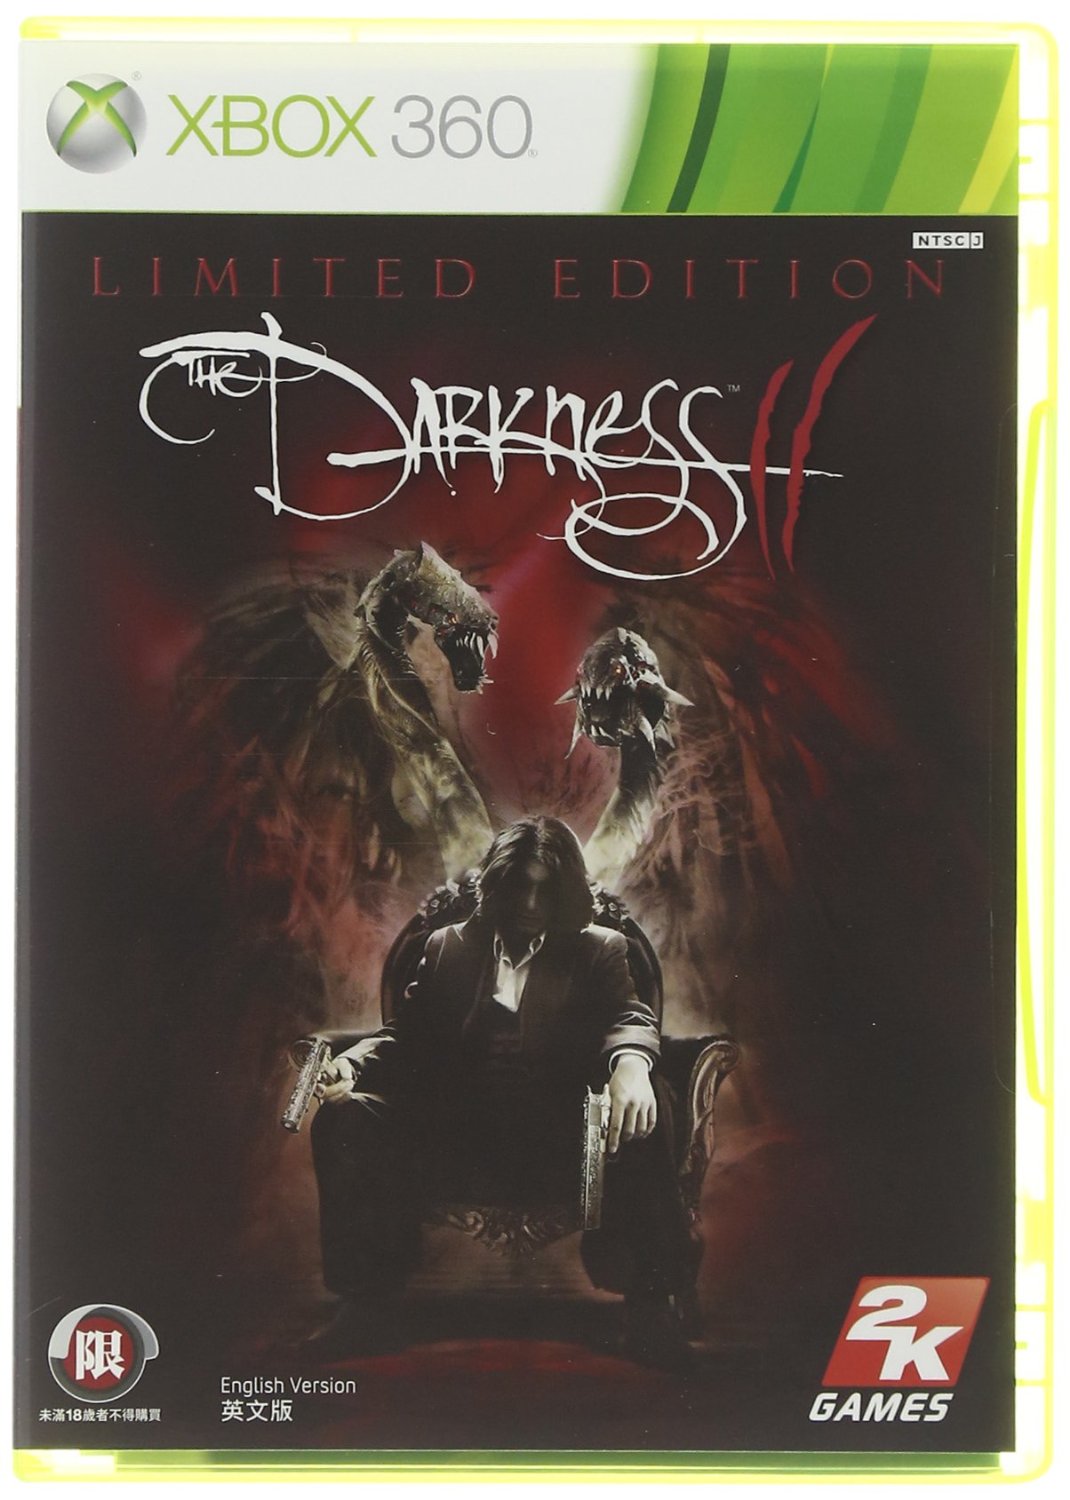 The Darkness II, 2K, Xbox 360, 710425490170 - image 1 of 5